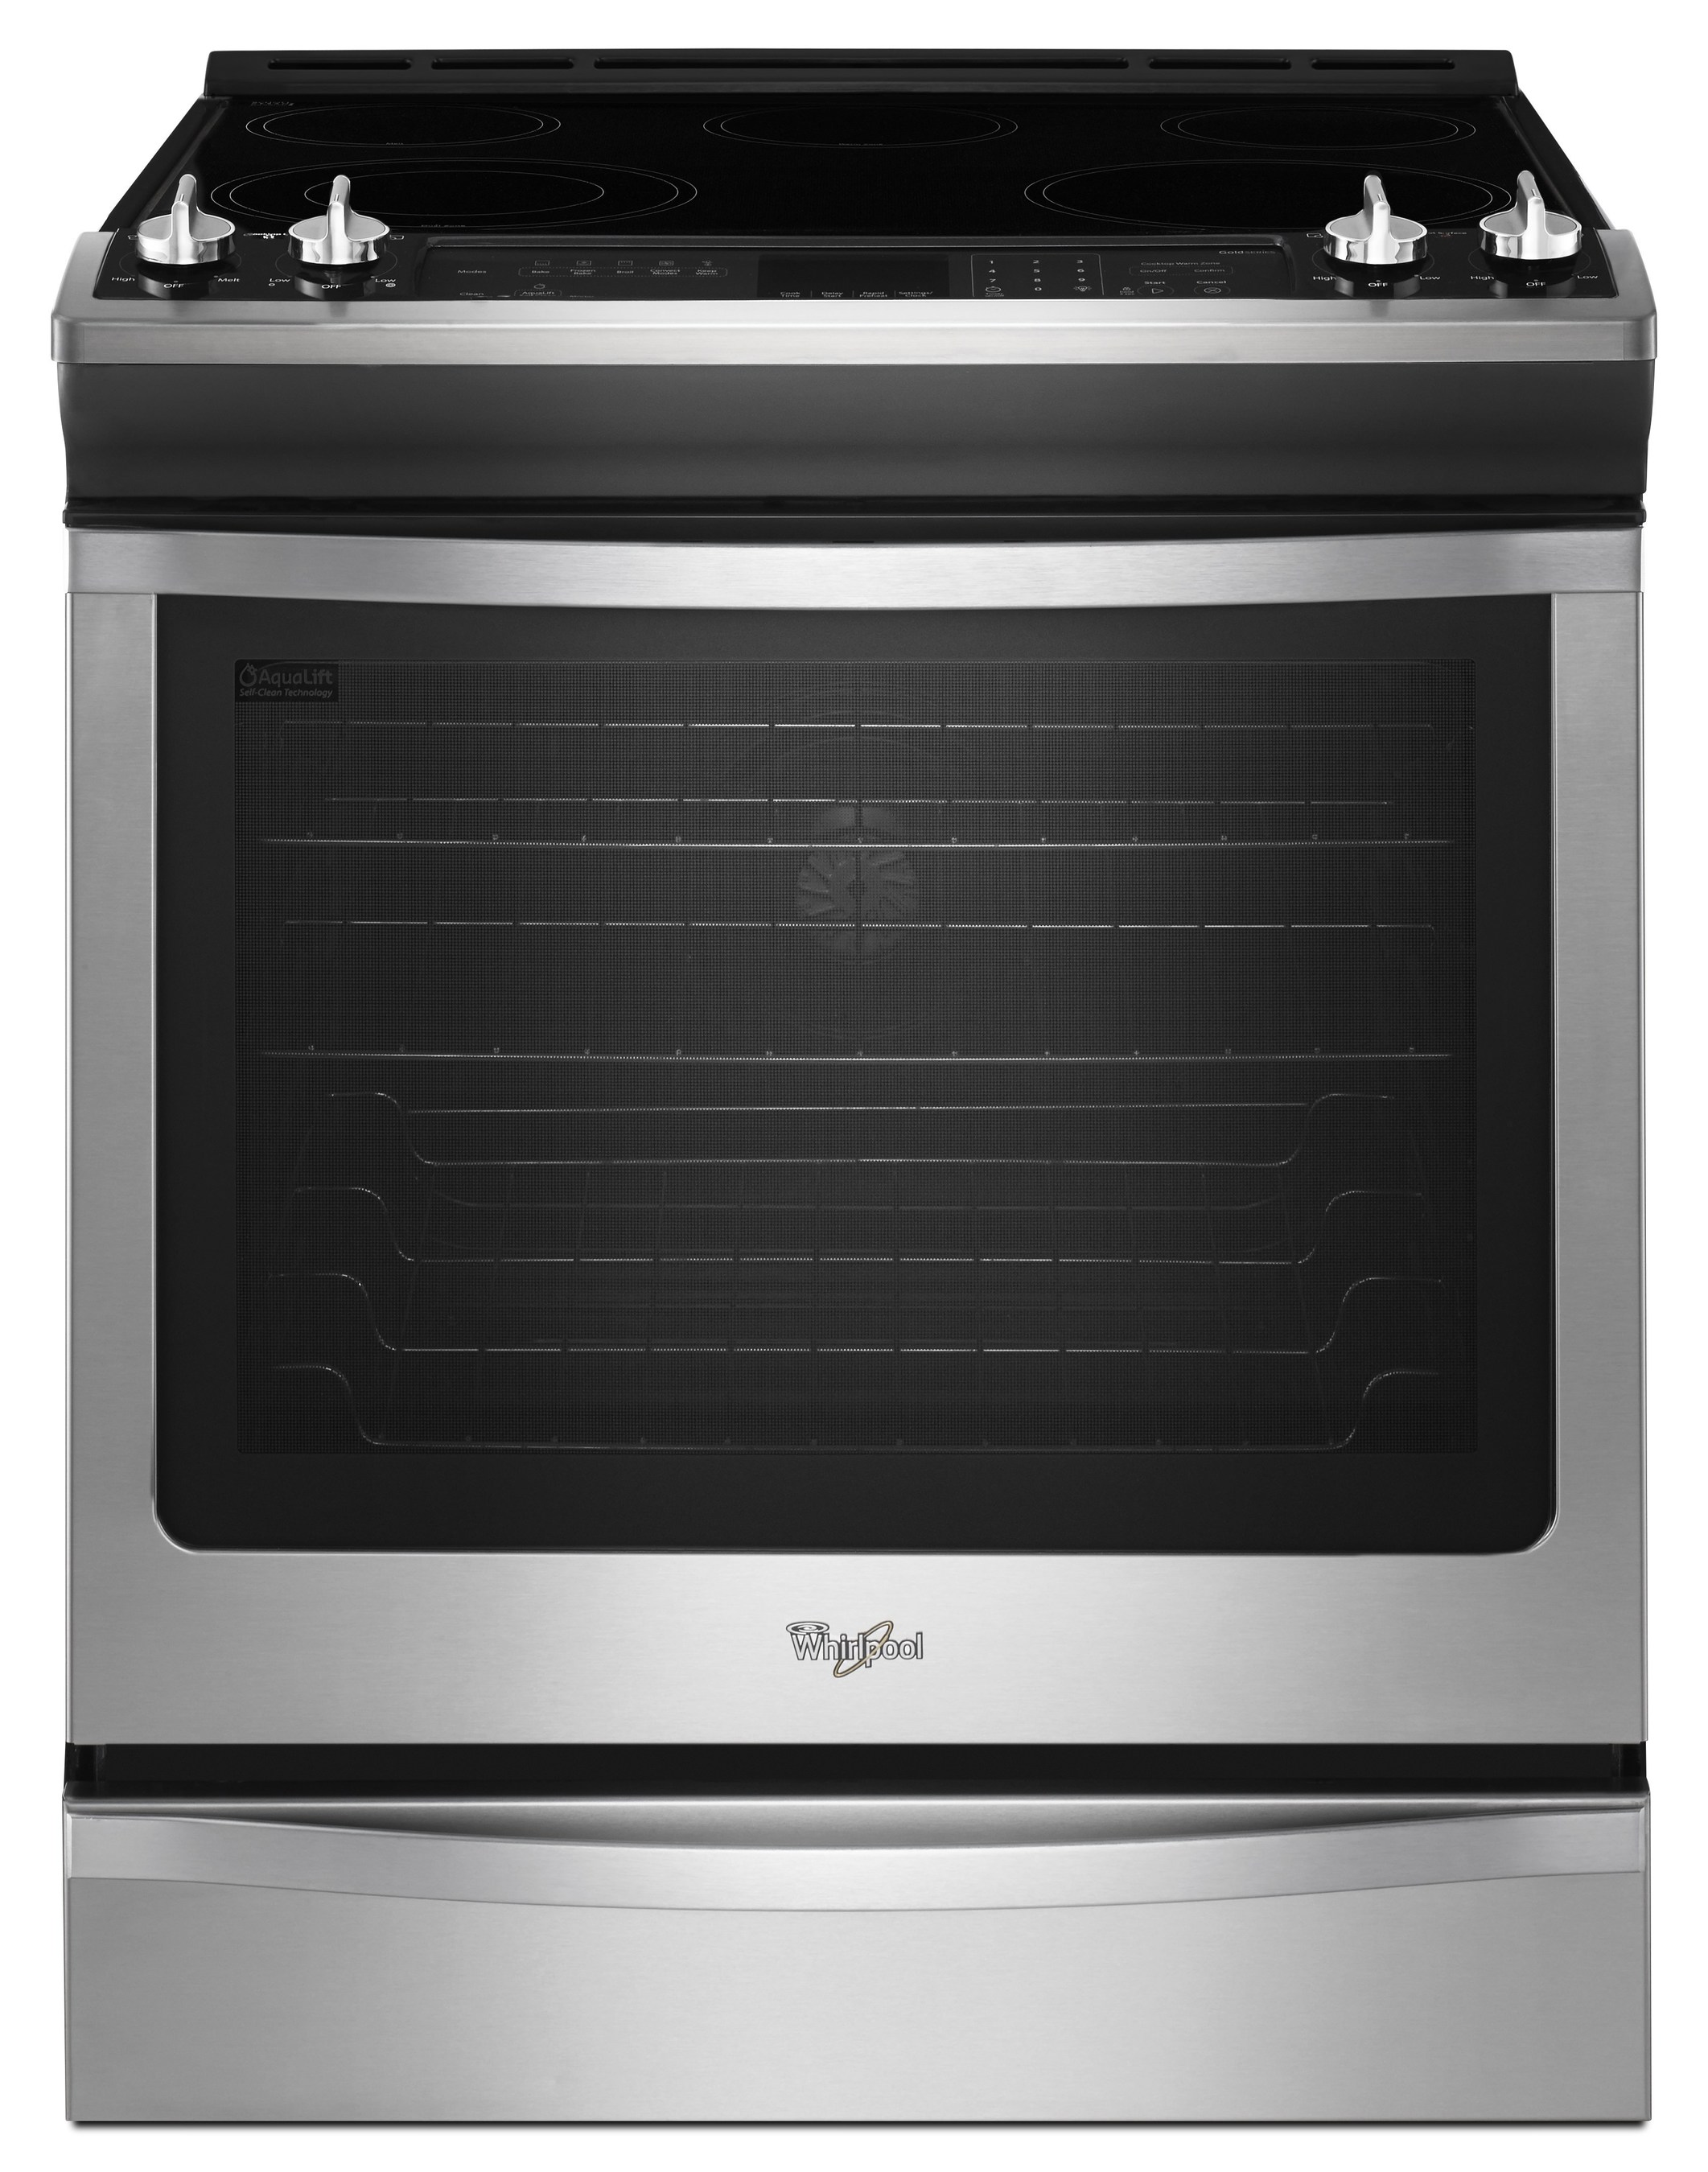 The Whirlpool(R) 5.8 Cu. Ft. Slide-In Gas Stove with TimeSavor(TM) Convection (WEG730H0DS) features the Flex Install (FIT) System by Whirlpool Corporation.